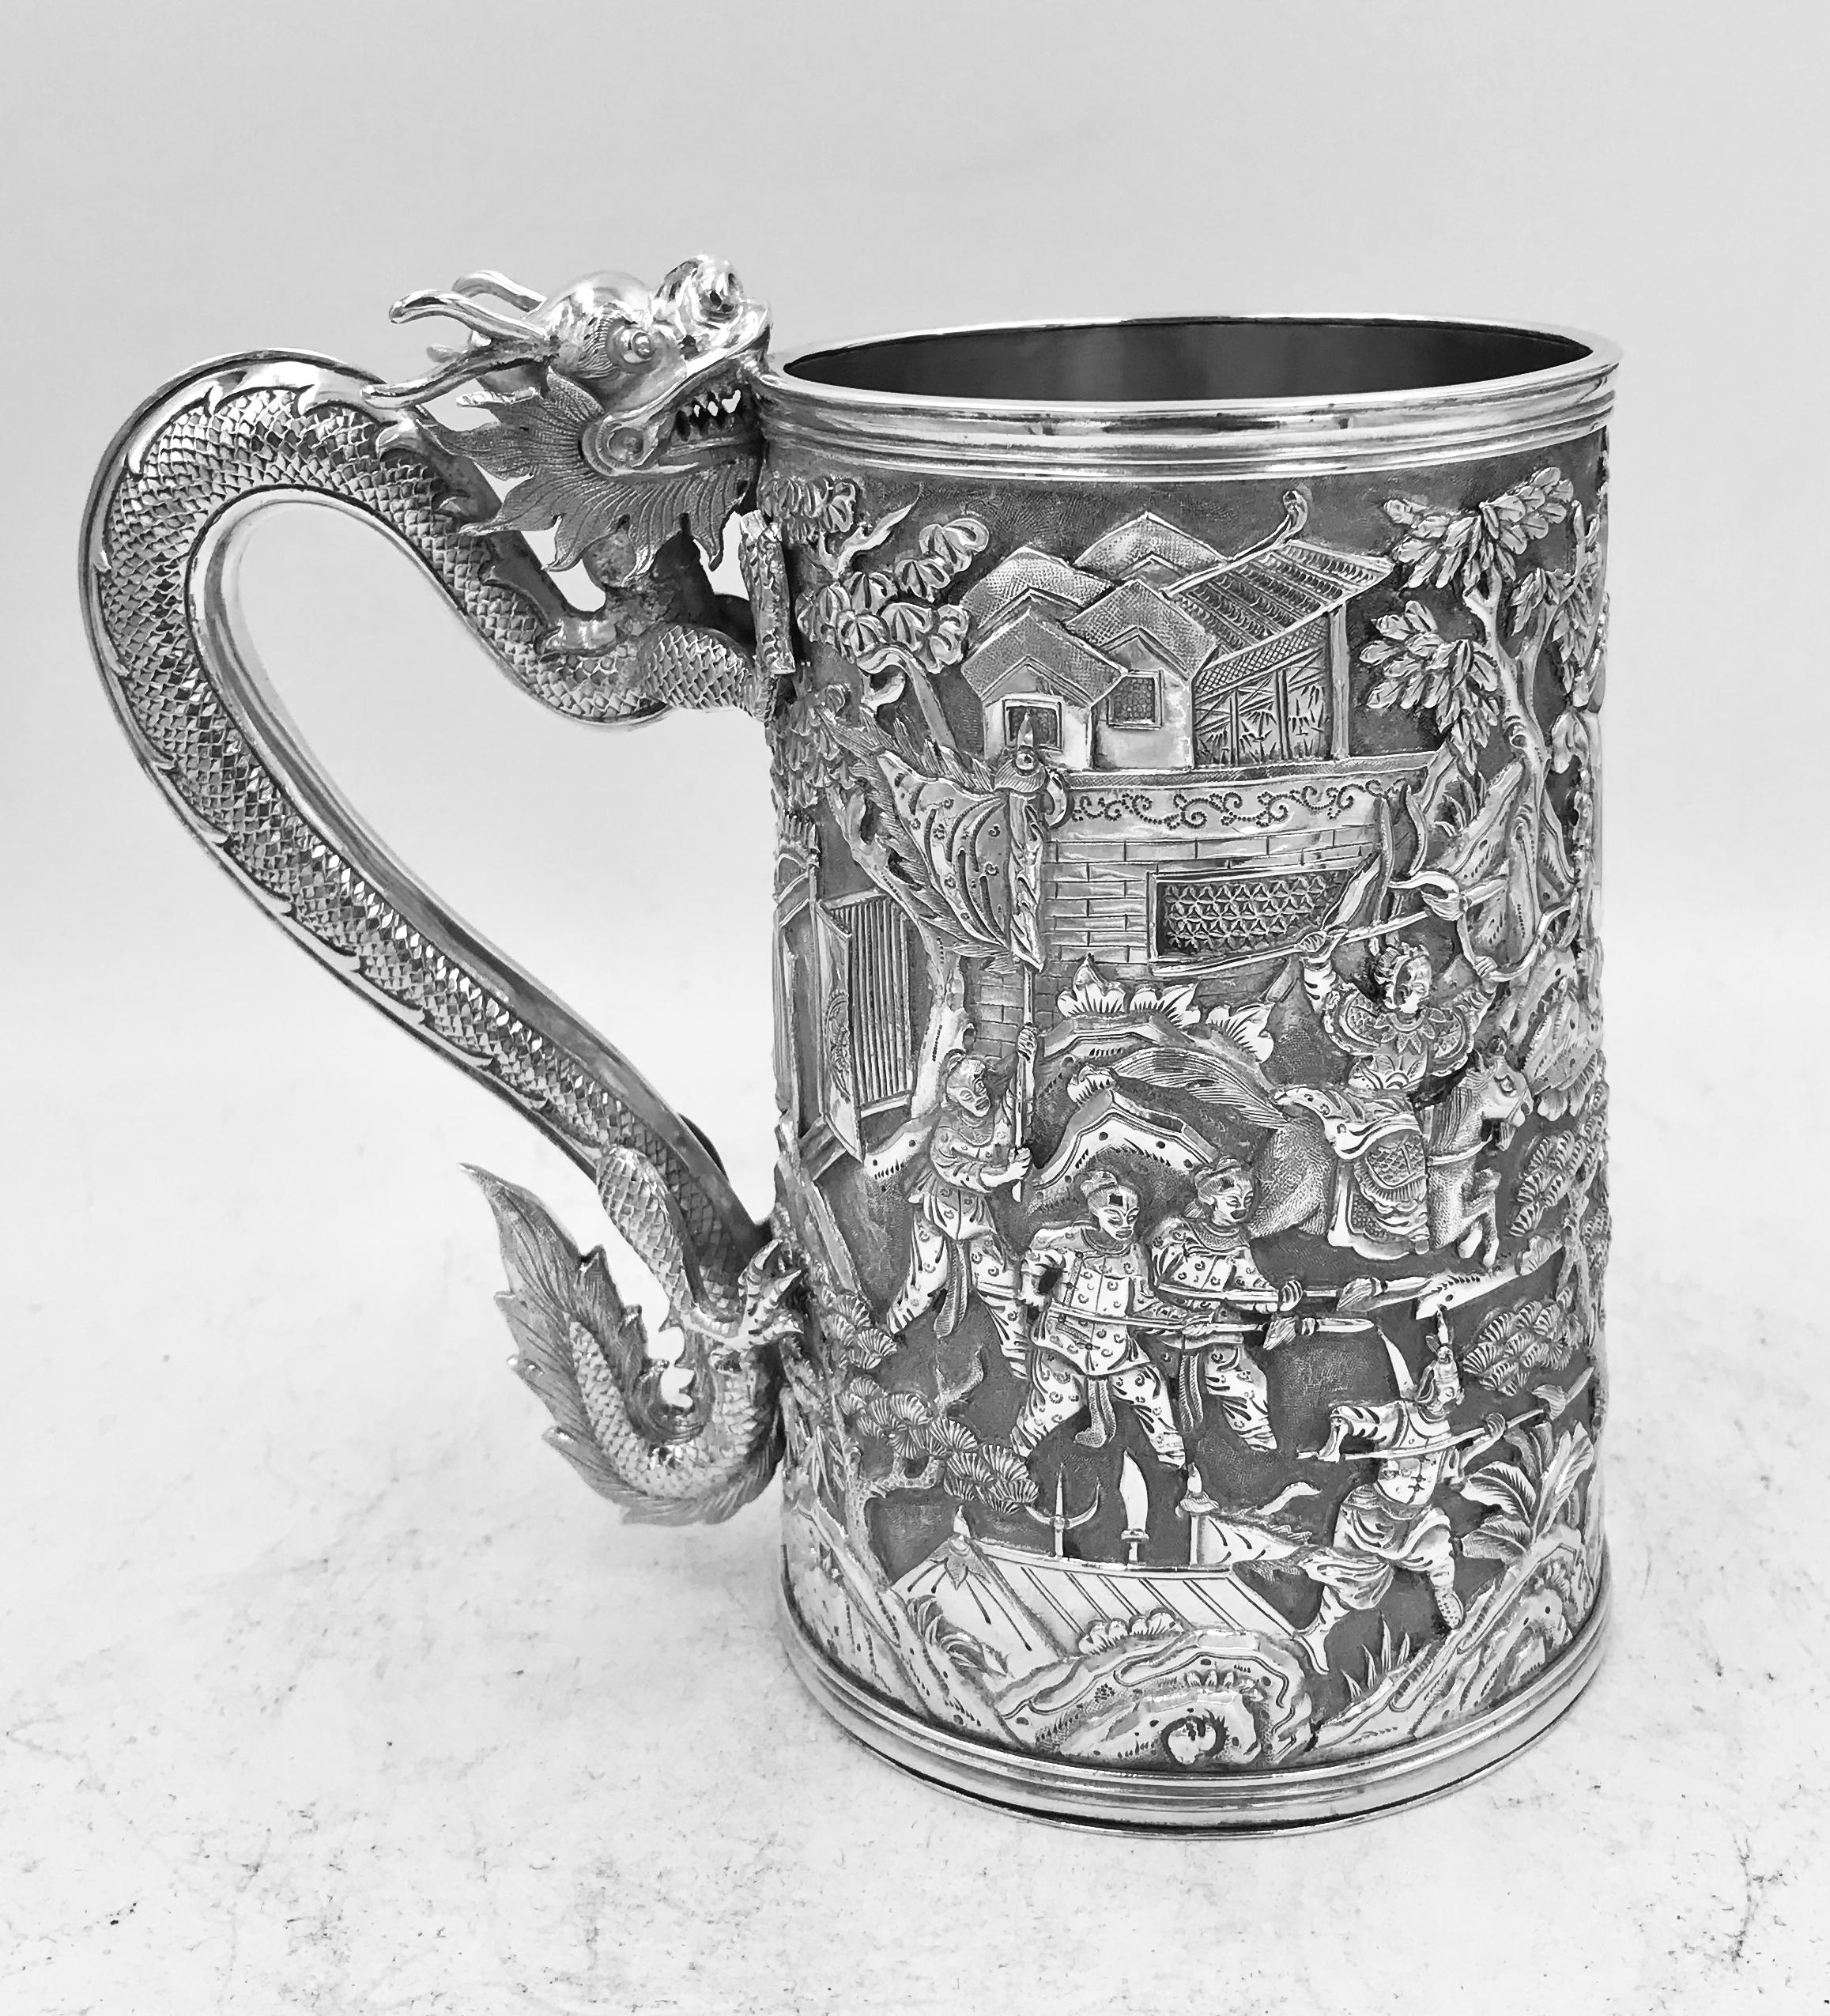 Chinese export silver mug marked with LC, for Leeching,?? (LiSheng), a silver retailer in canton from circa 1846-1890 and also in Hong Kong. The firm of Leeching sold various items of silver to clients in China and is particularly known for